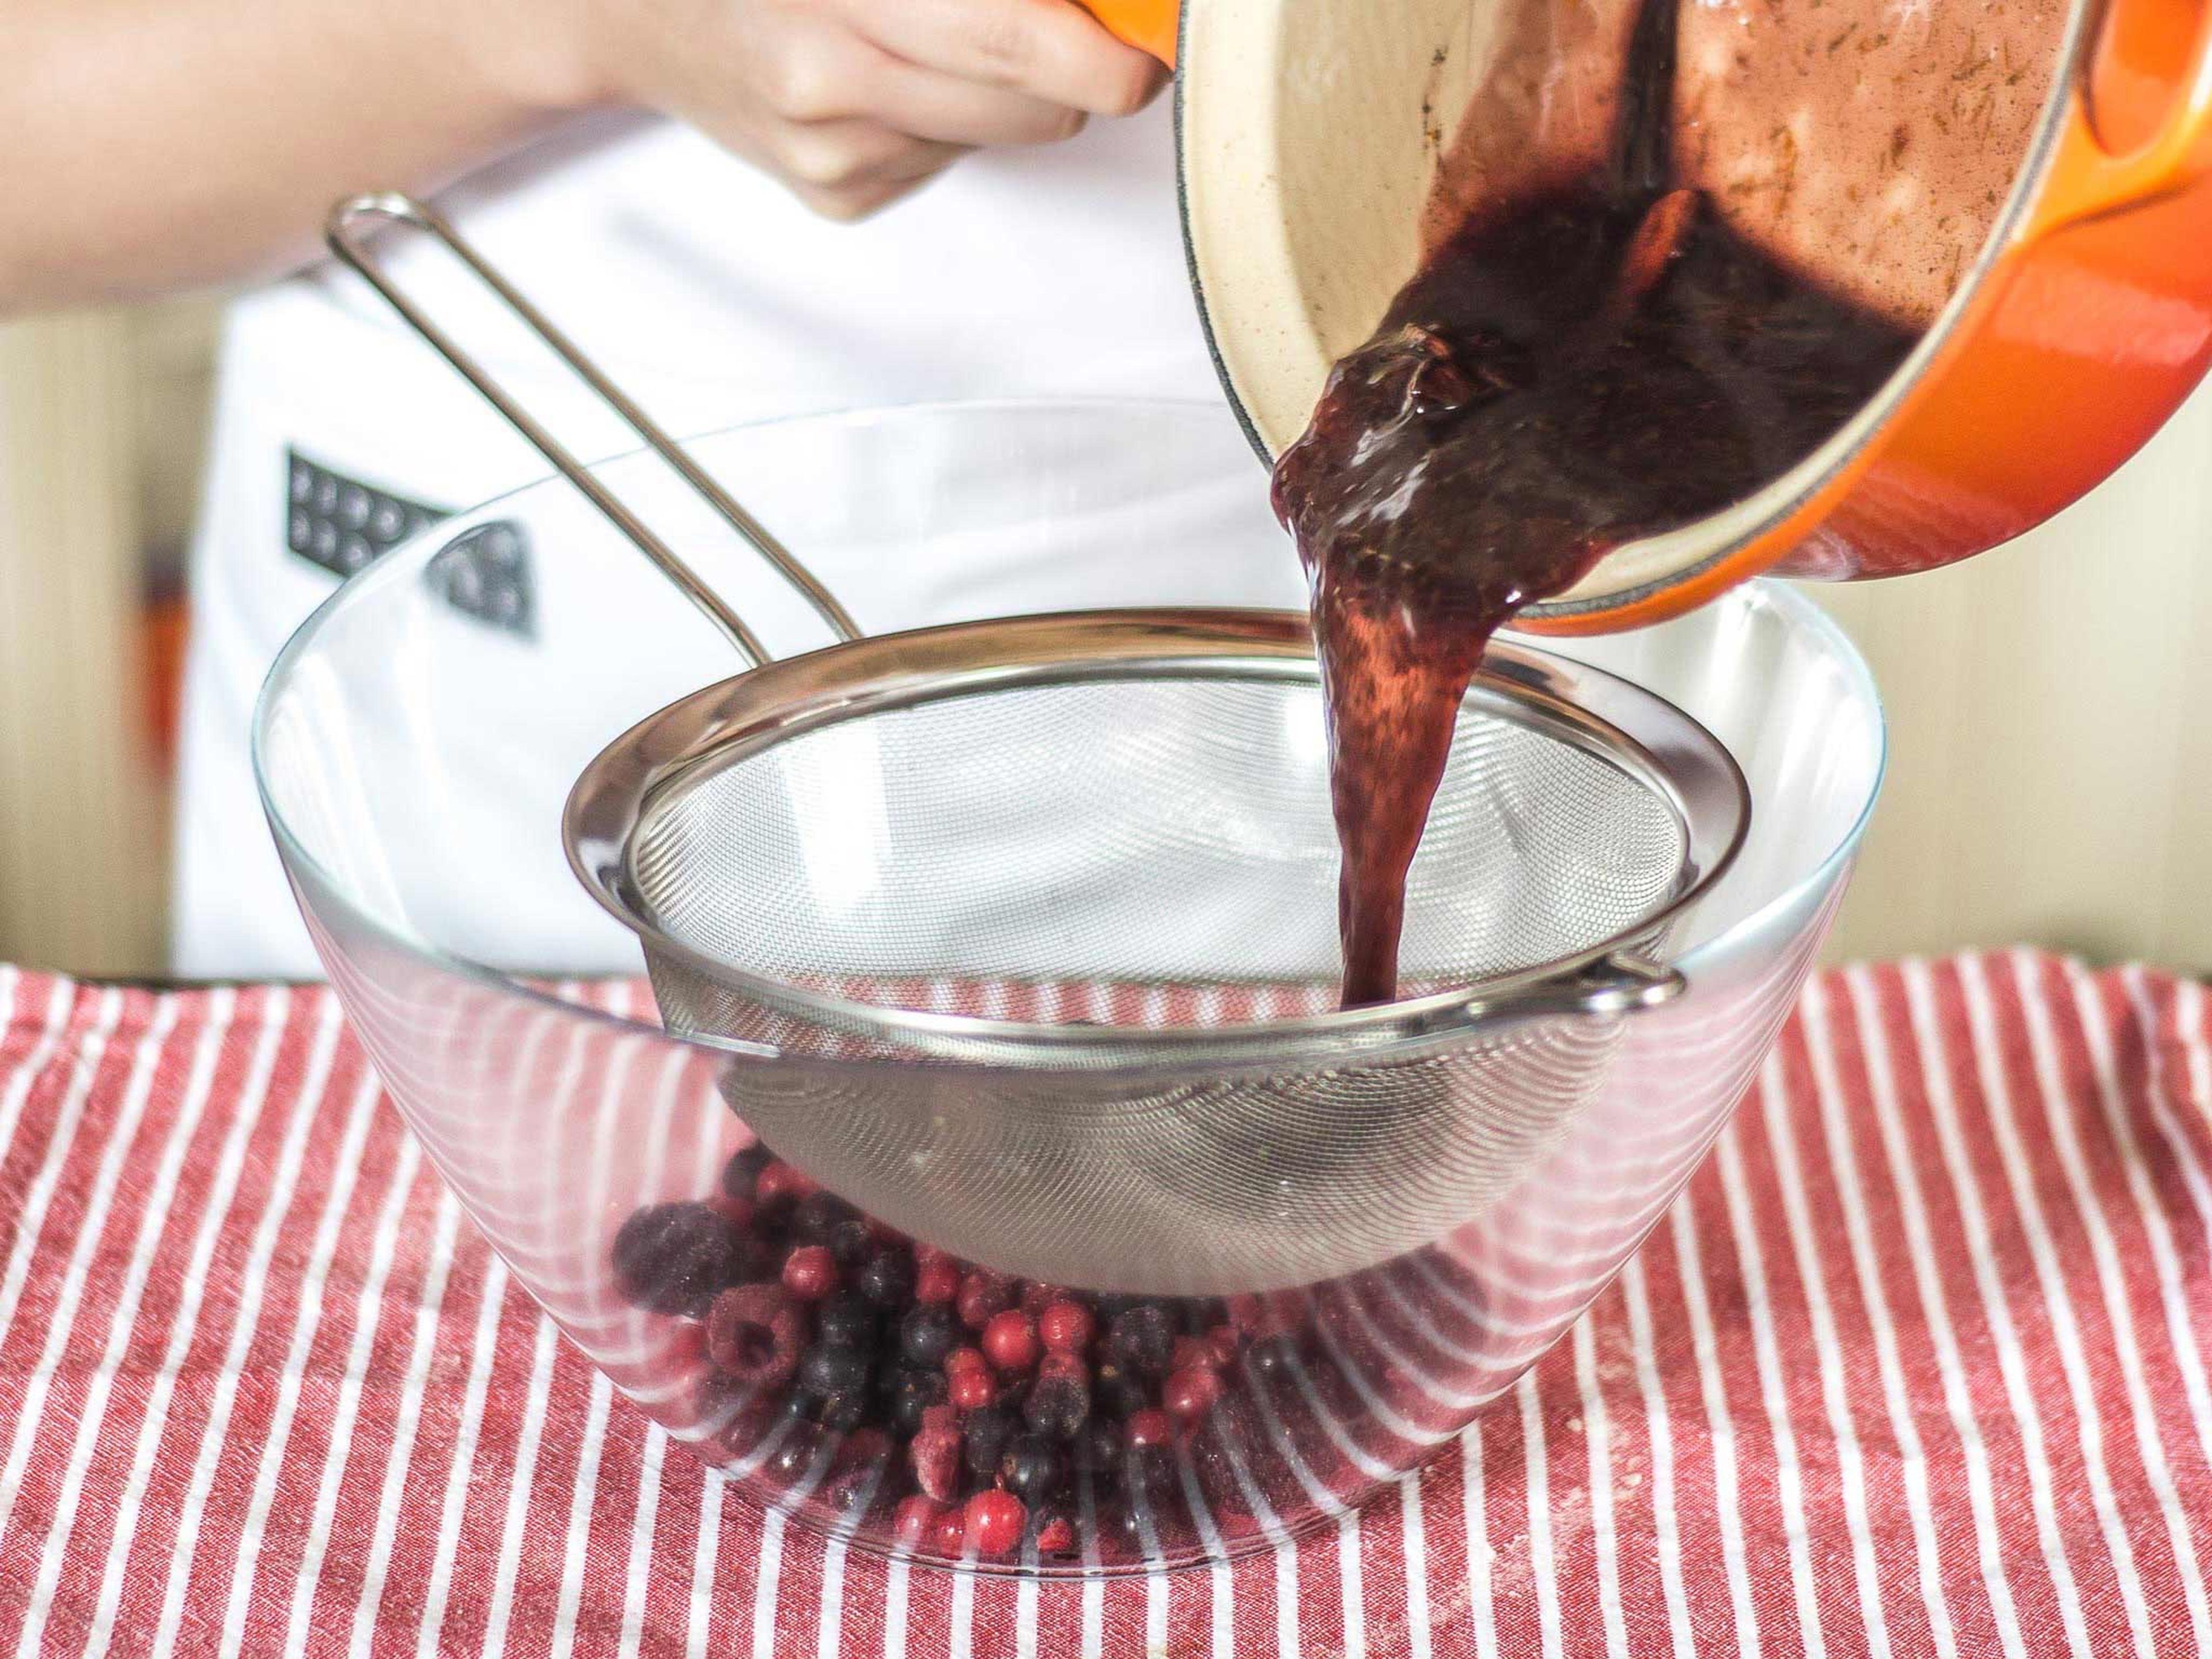 Bind the boiled mixture with cornstarch and pour it through a wire strainer onto the frozen berries. Remove the strainer and put the compote into small bowls to chill for at least 1 hour. Garnish with mint and serve with warm vanilla sauce.